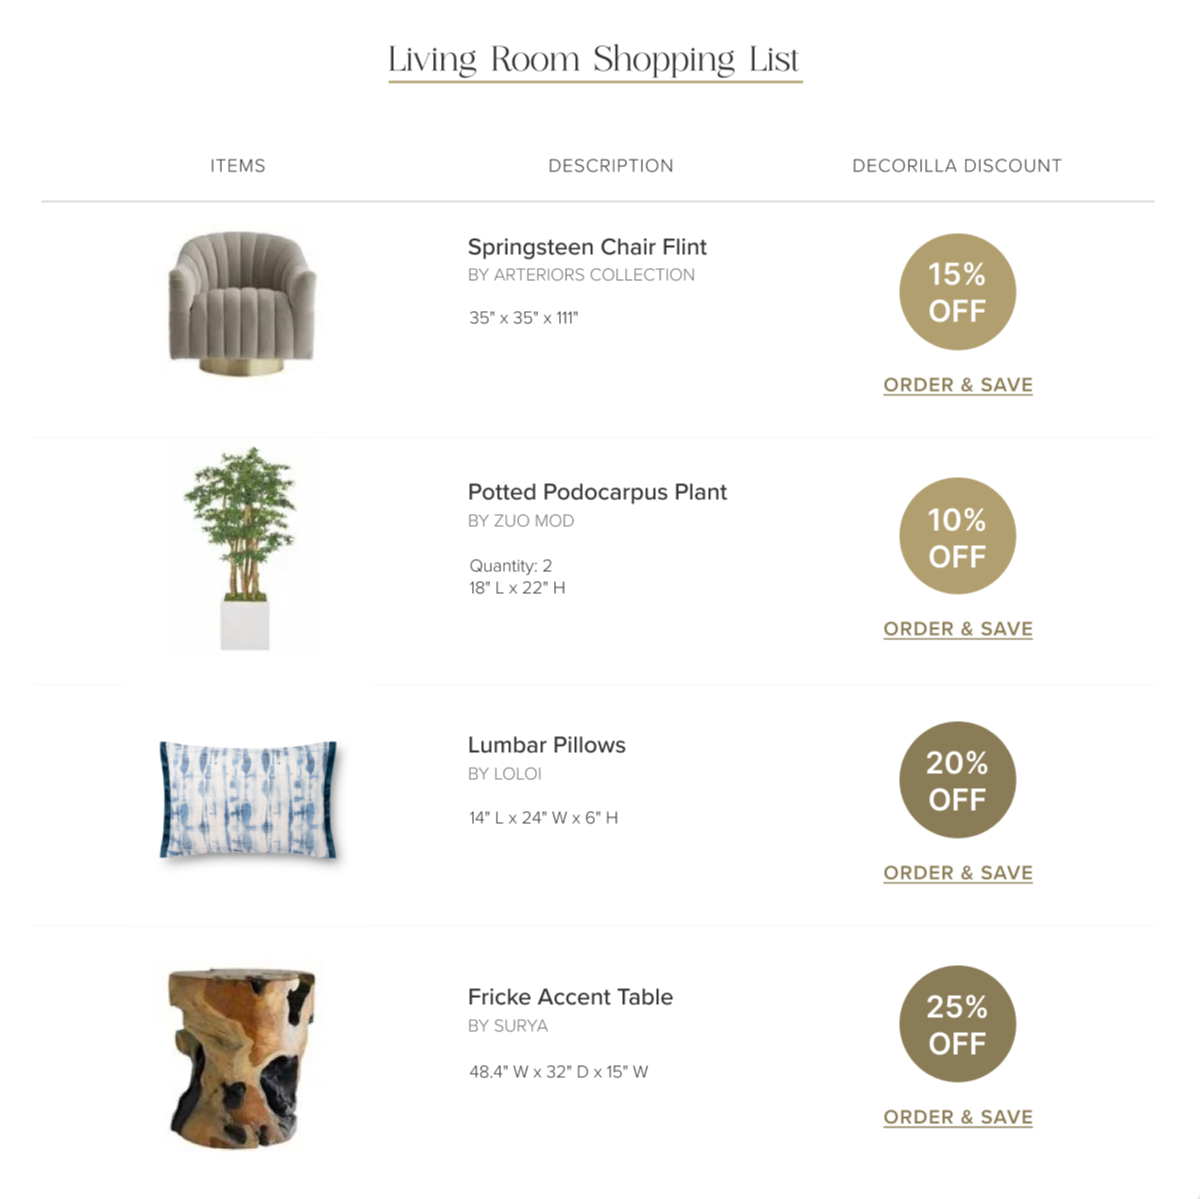 Curated shopping list from Decorilla online decorating services